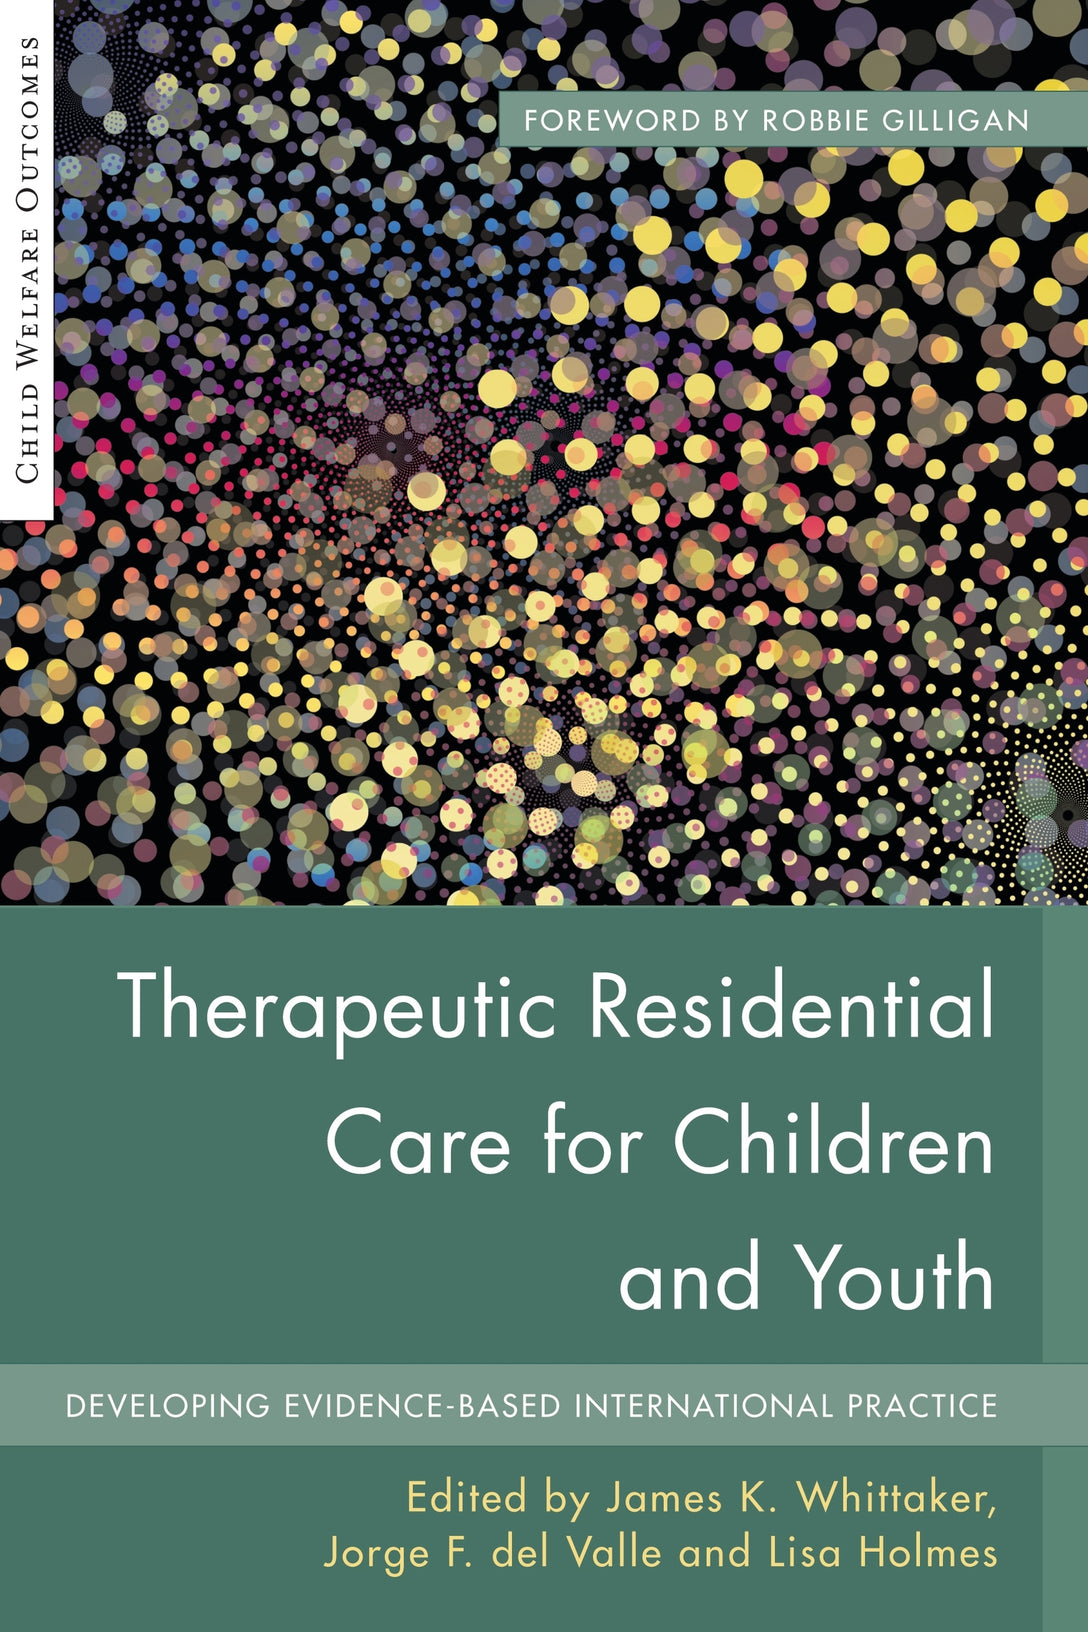 Therapeutic Residential Care for Children and Youth by James K Whittaker, Lisa Holmes, Robbie Gilligan, Jorge Fernandez del del Valle